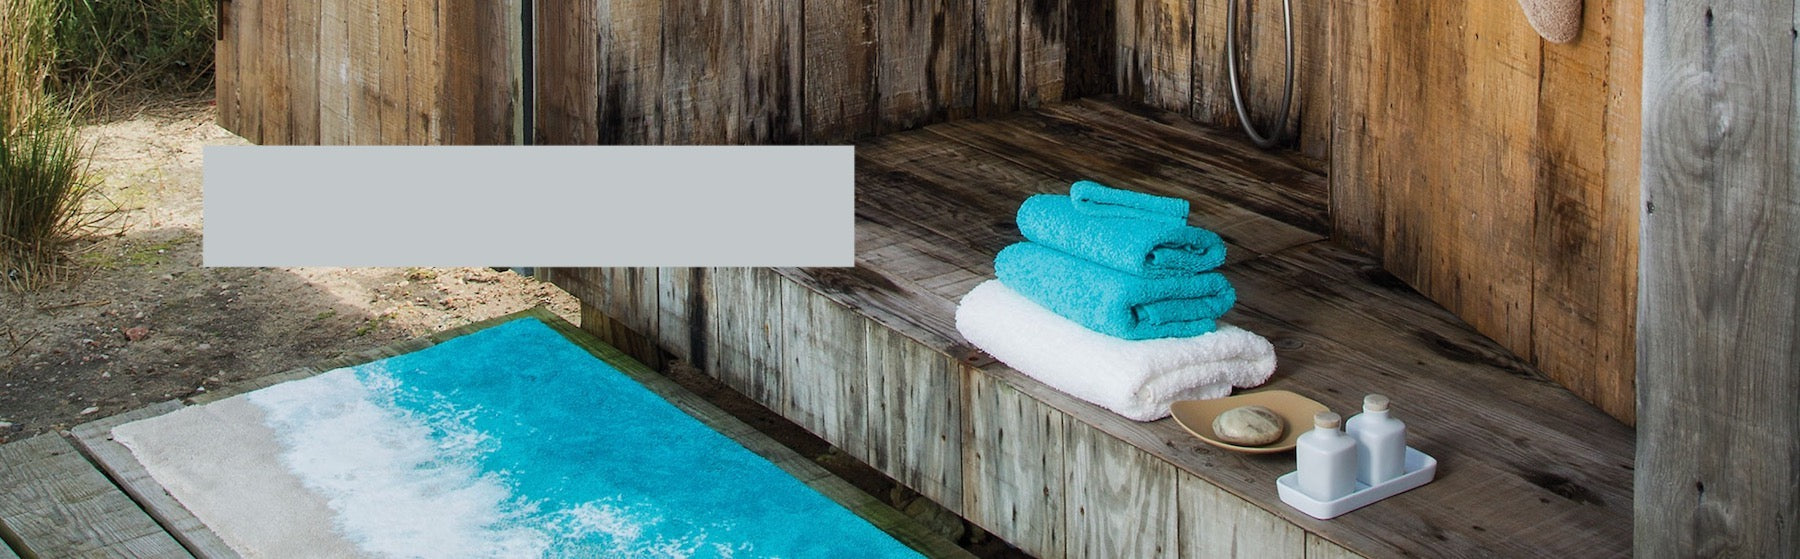 Abyss & Habidecor | Brands at Fig Linens and Home | Bath Towels, Tub Mats, Bath Rugs, Beach Towels, Robes